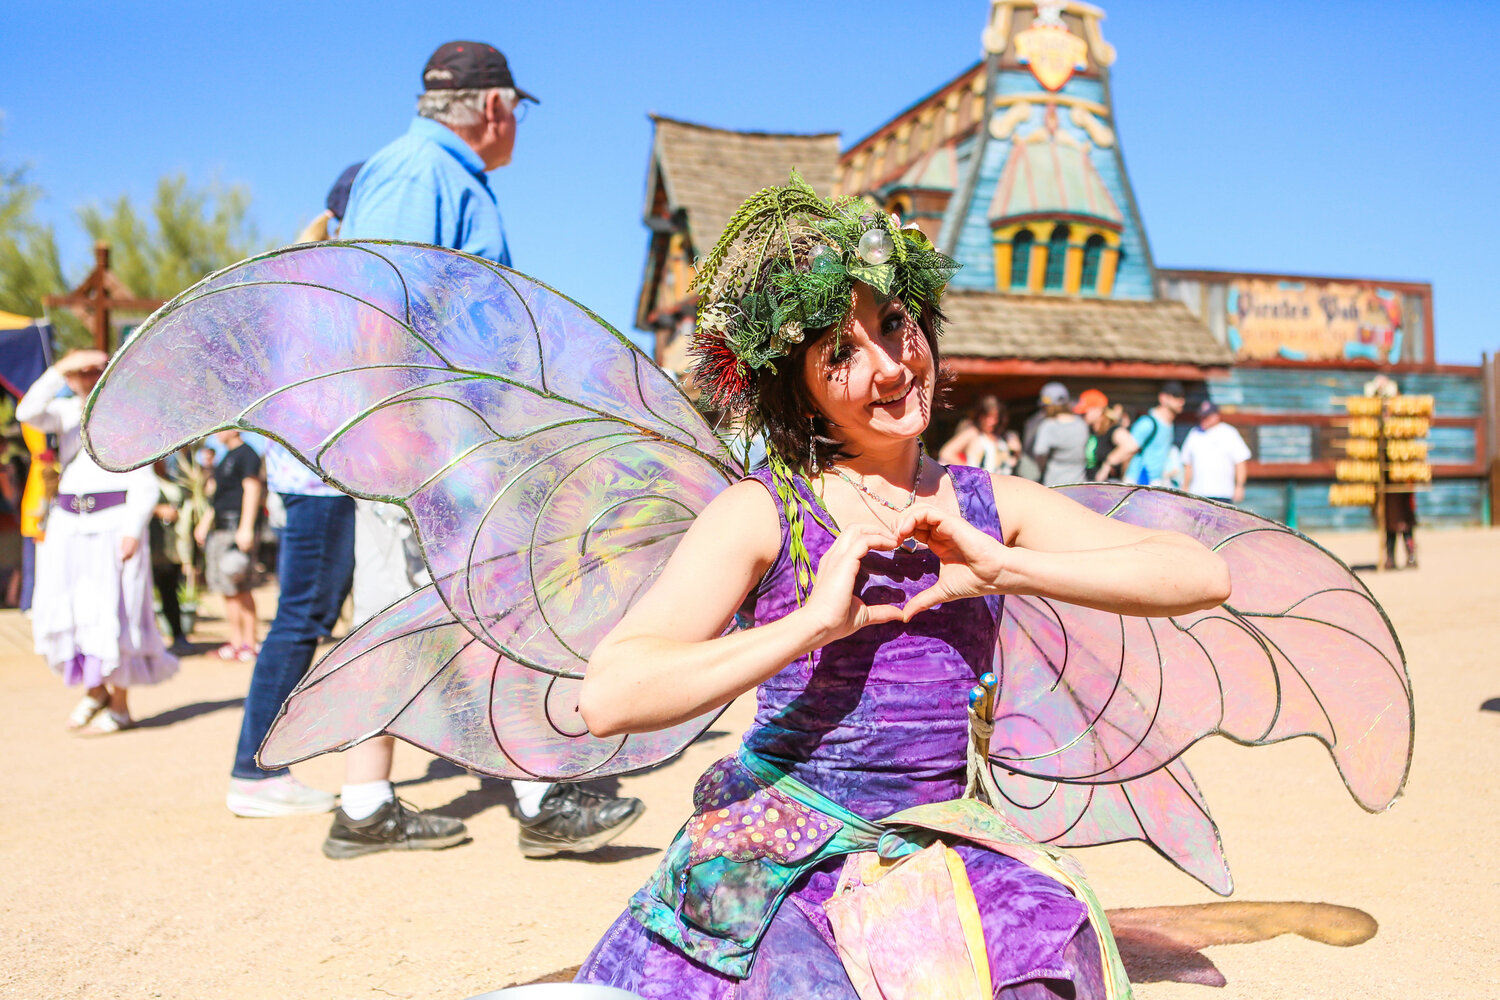 The festival’s 50-acre 16th century European village has 16 stages of nonstop entertainment, music, comedy, falconry, dance, mermaids and acrobatics. Foolish pleasures mix with artisan treasures as you shop, eat and mingle with a cast of nearly 2,000 colorfully costumed characters.